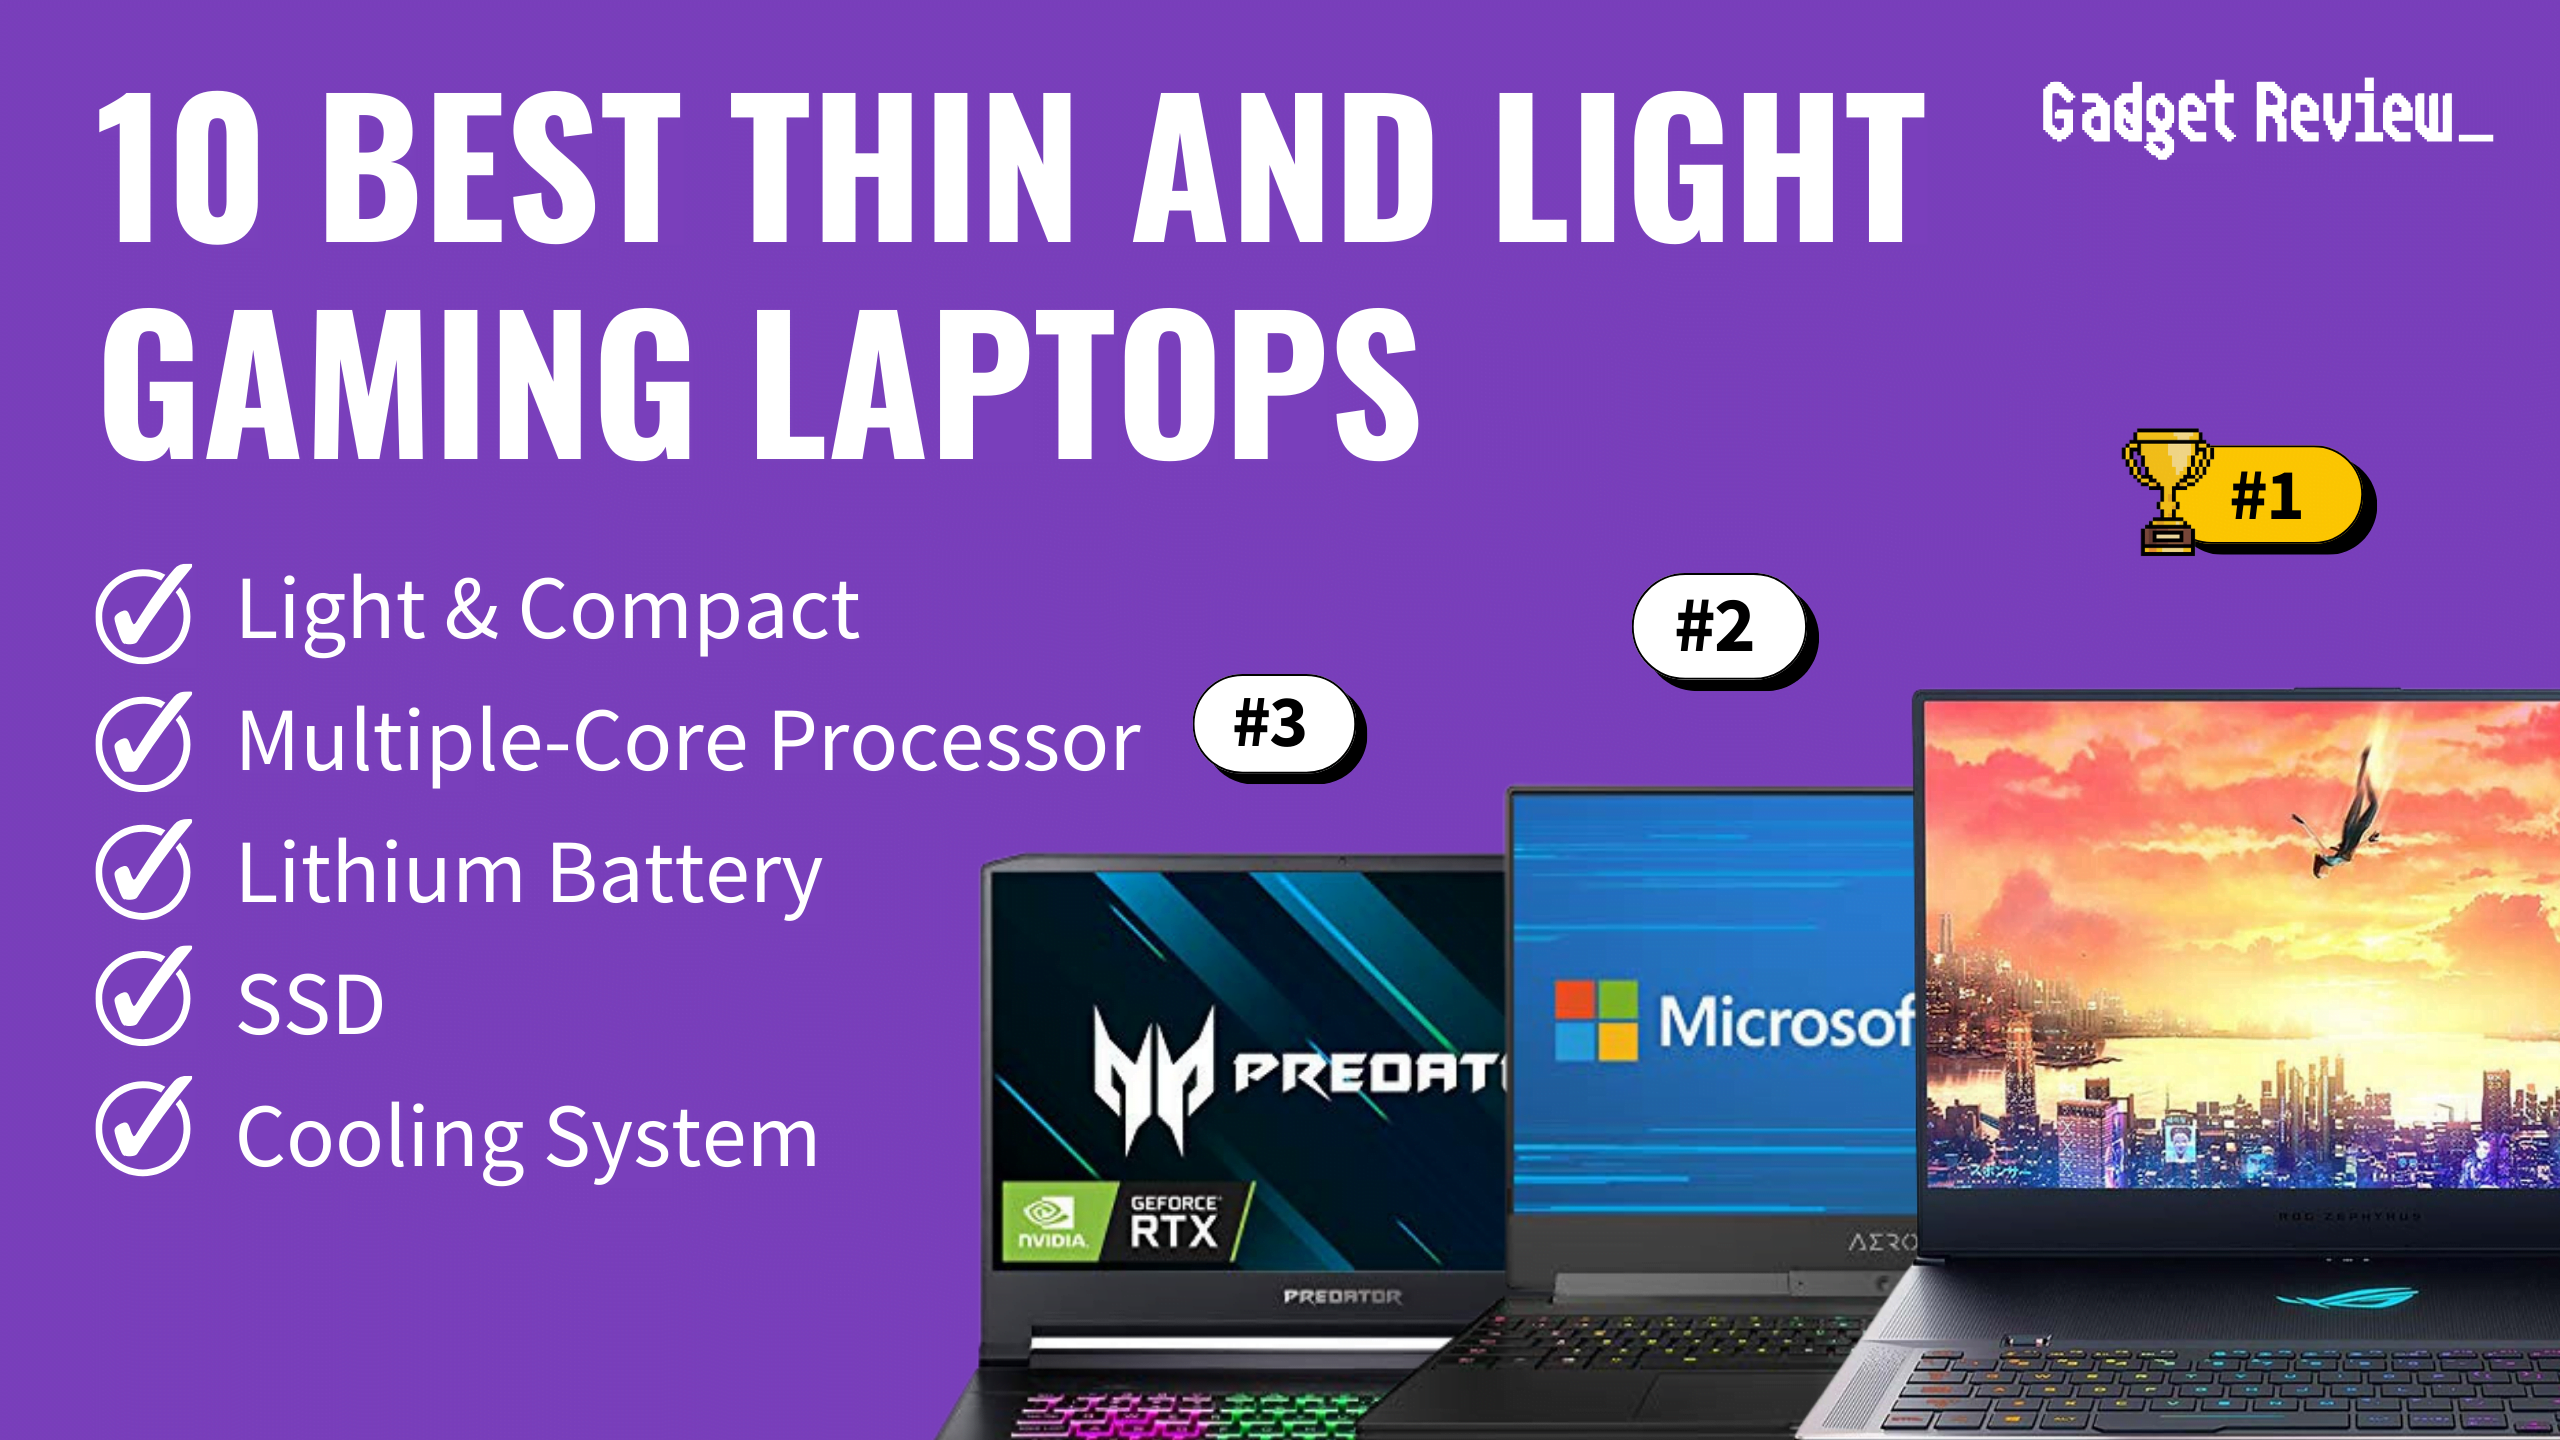 10 Best Thin and Light Gaming Laptops